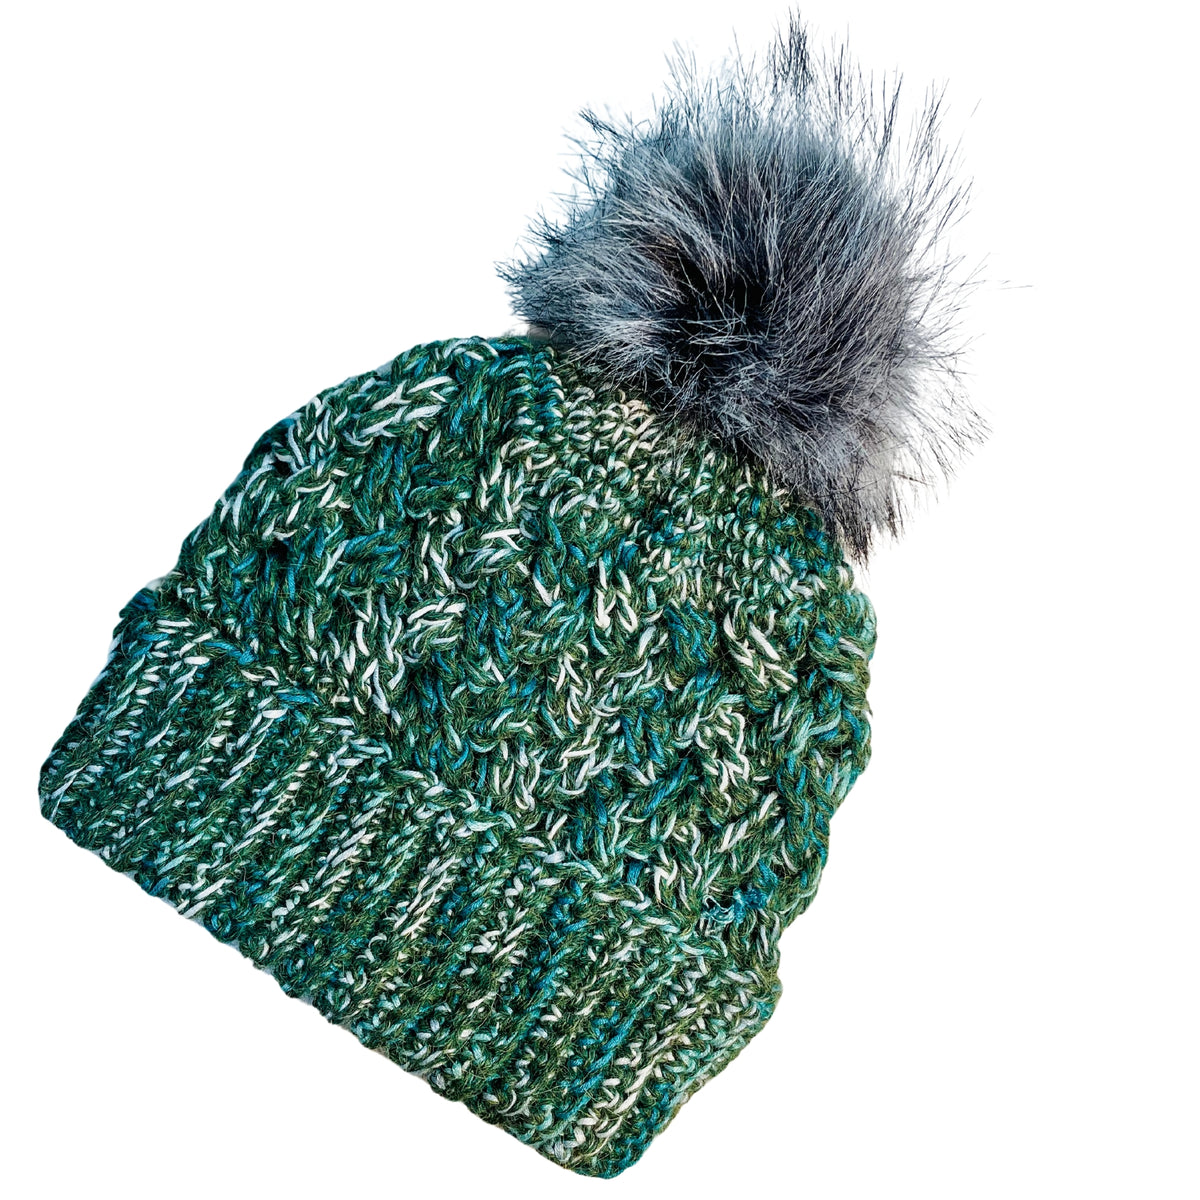 Moss green, teal, turquoise, seafoam, and white colored cozy soft warm handmade knitted crochet celtic hat with a multi-gray pom pom made in Montana by Alpacas of Montana.